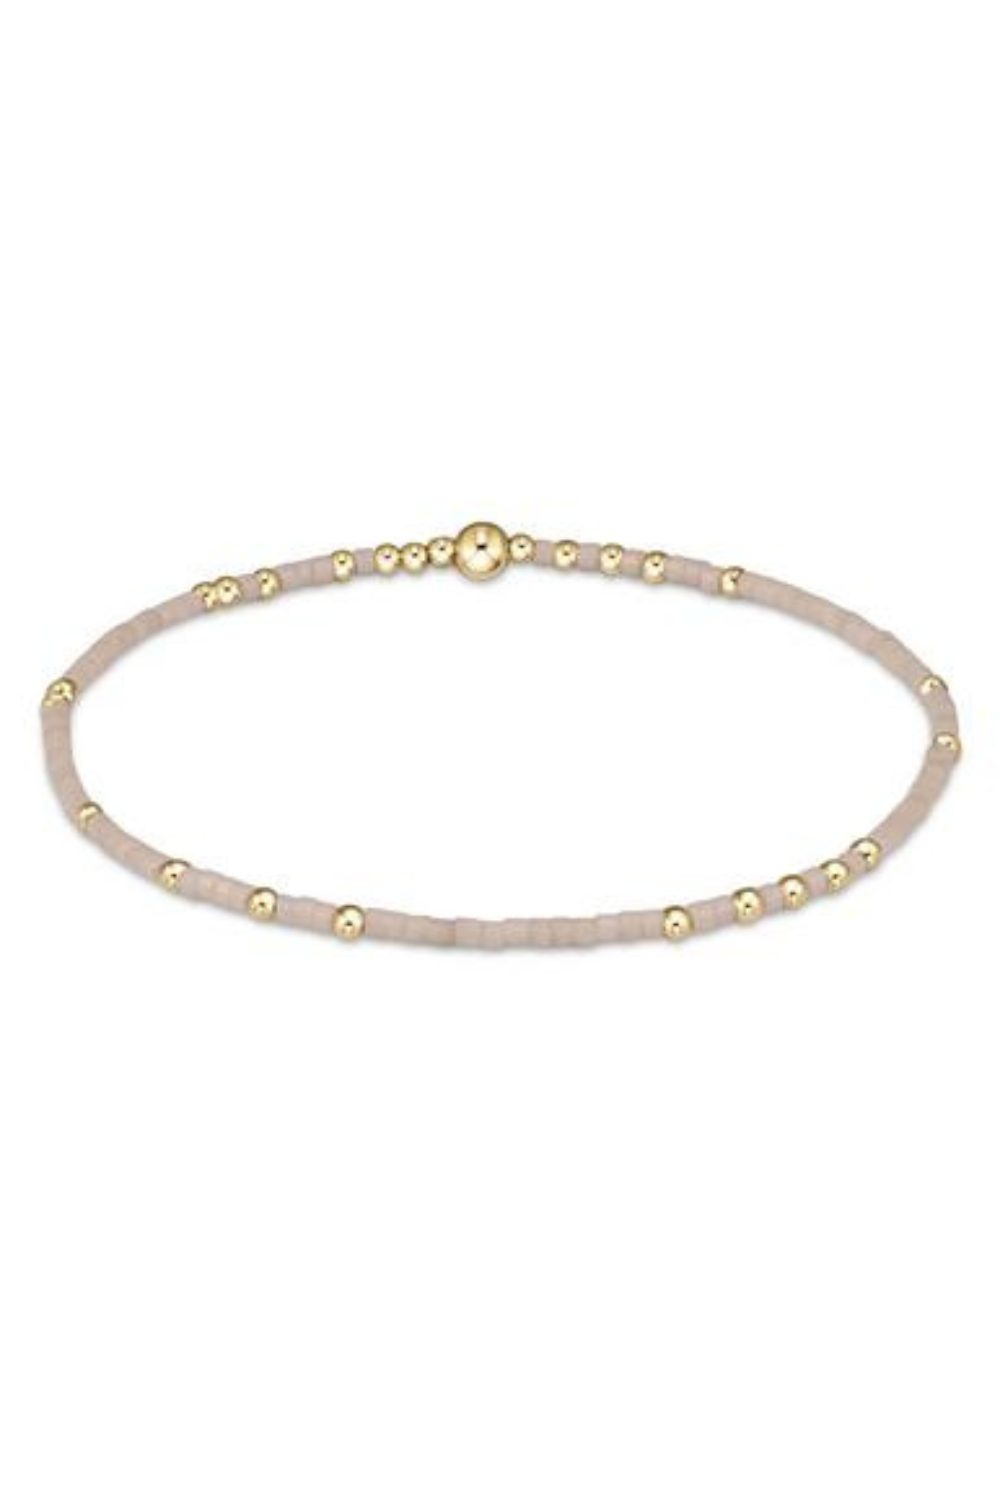 ENewton Hope Unwritten Off white Bracelet at Blooming Boutique